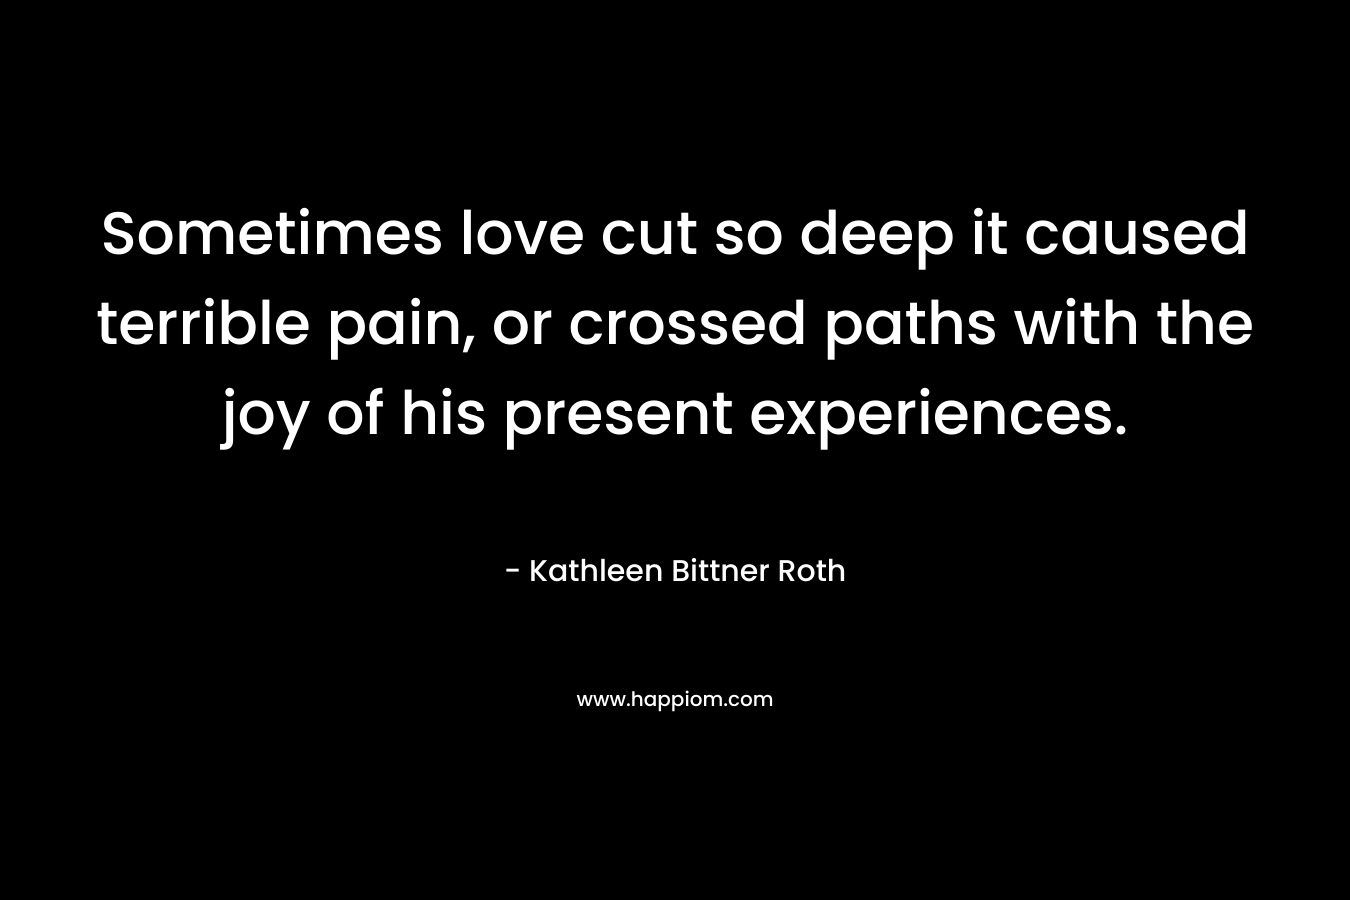 Sometimes love cut so deep it caused terrible pain, or crossed paths with the joy of his present experiences.